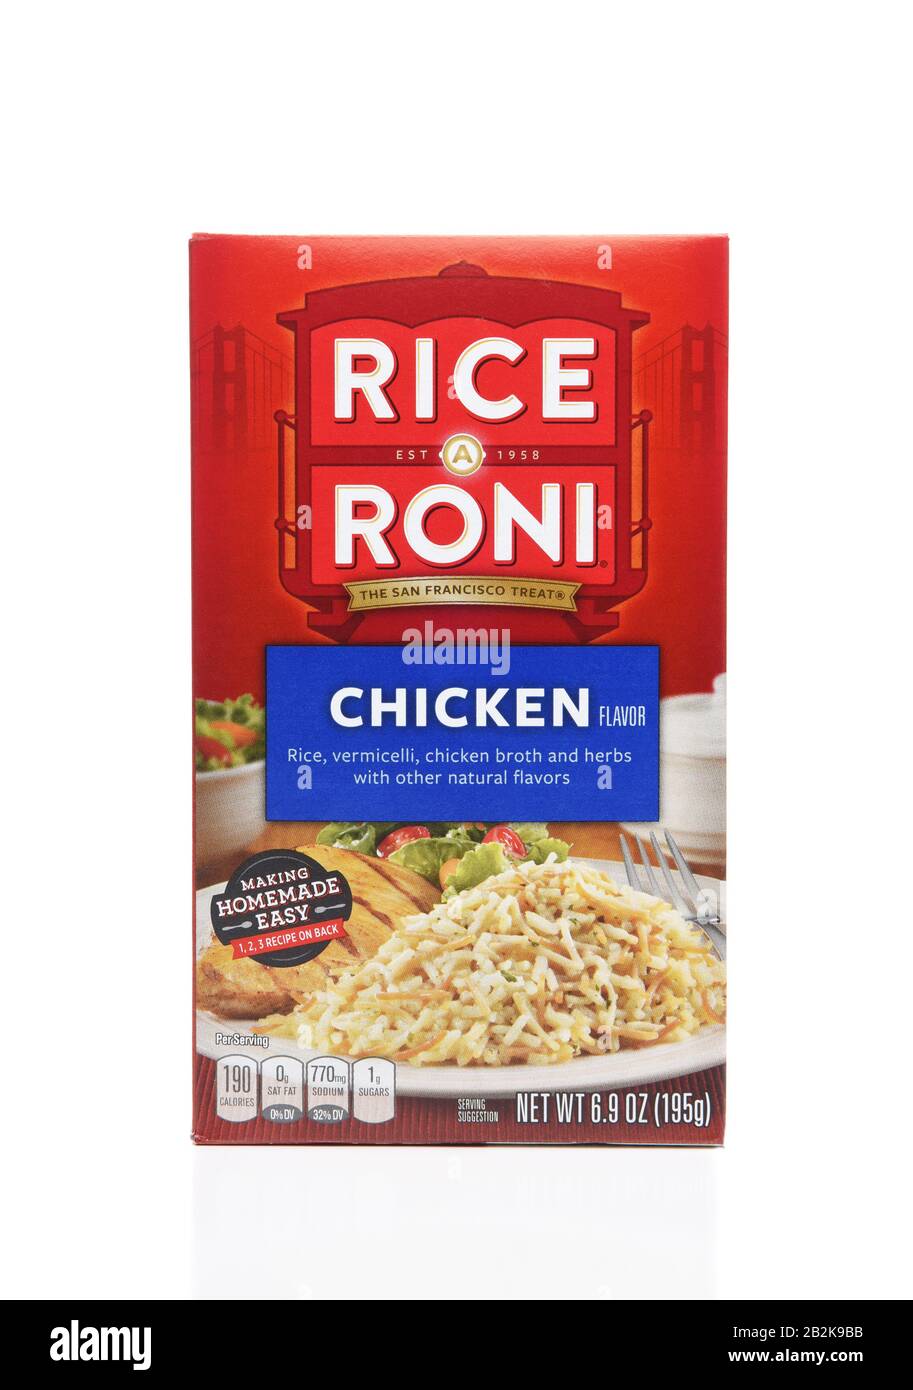 IRVINE, CA - AUGUST 6, 2018: A package of Rice-A-Roni Chicken Flavor Stock Photo